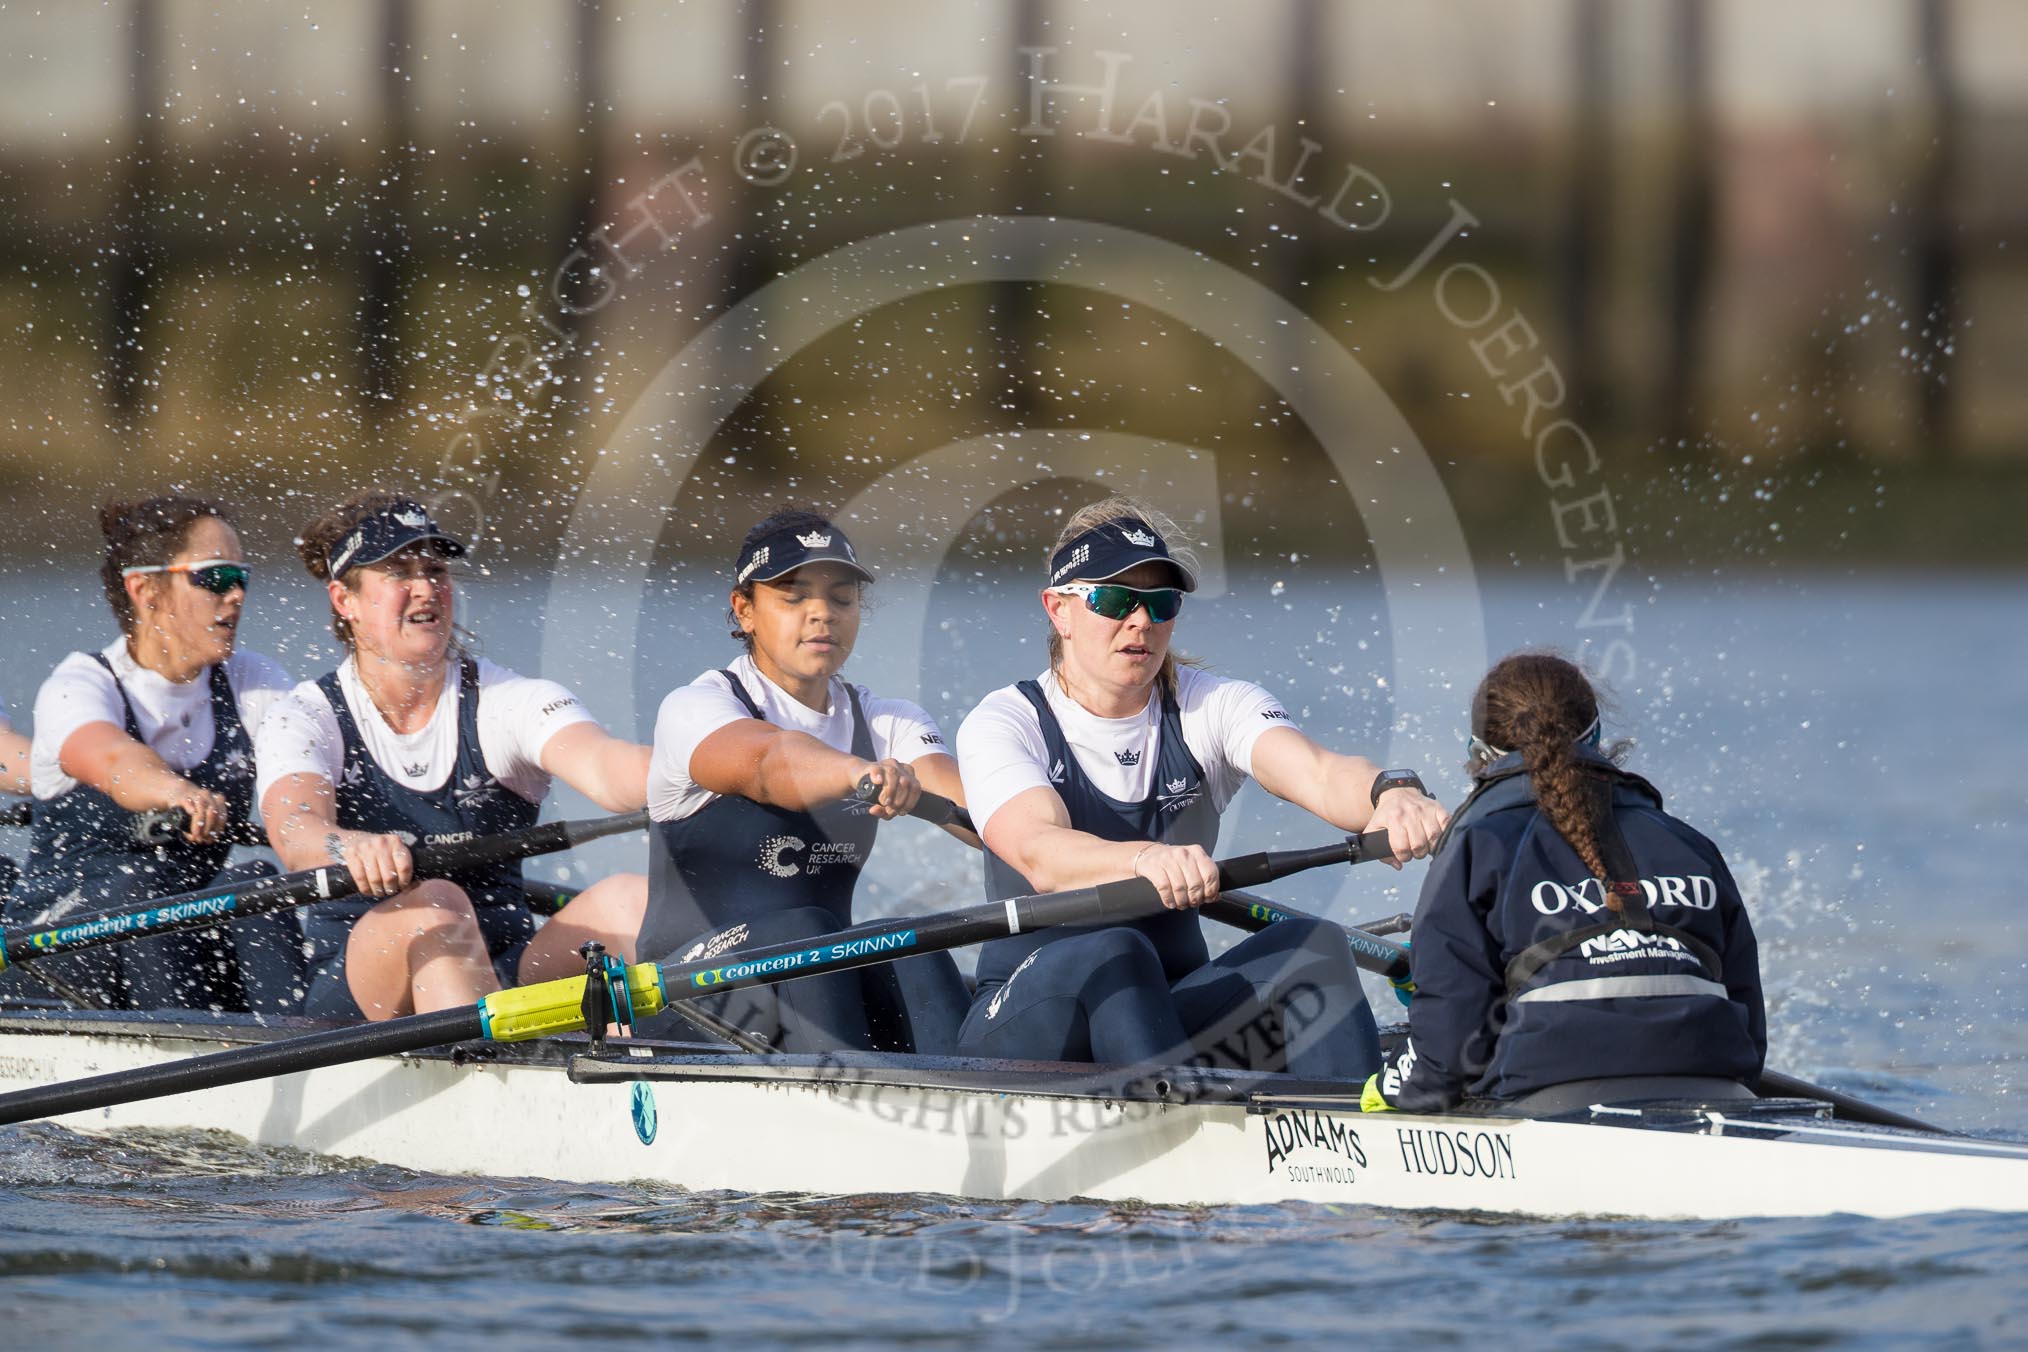 The Cancer Research UK Boat Race season 2017 - Women's Boat Race Fixture OUWBC vs Molesey BC: The OUWBC boat - here 5 Chloe Laverack, 6 Harriet Austin, 7 Jenna Hebert, stroke Emily Cameron, cox Eleanor Shearer.
River Thames between Putney Bridge and Mortlake,
London SW15,

United Kingdom,
on 19 March 2017 at 16:05, image #85